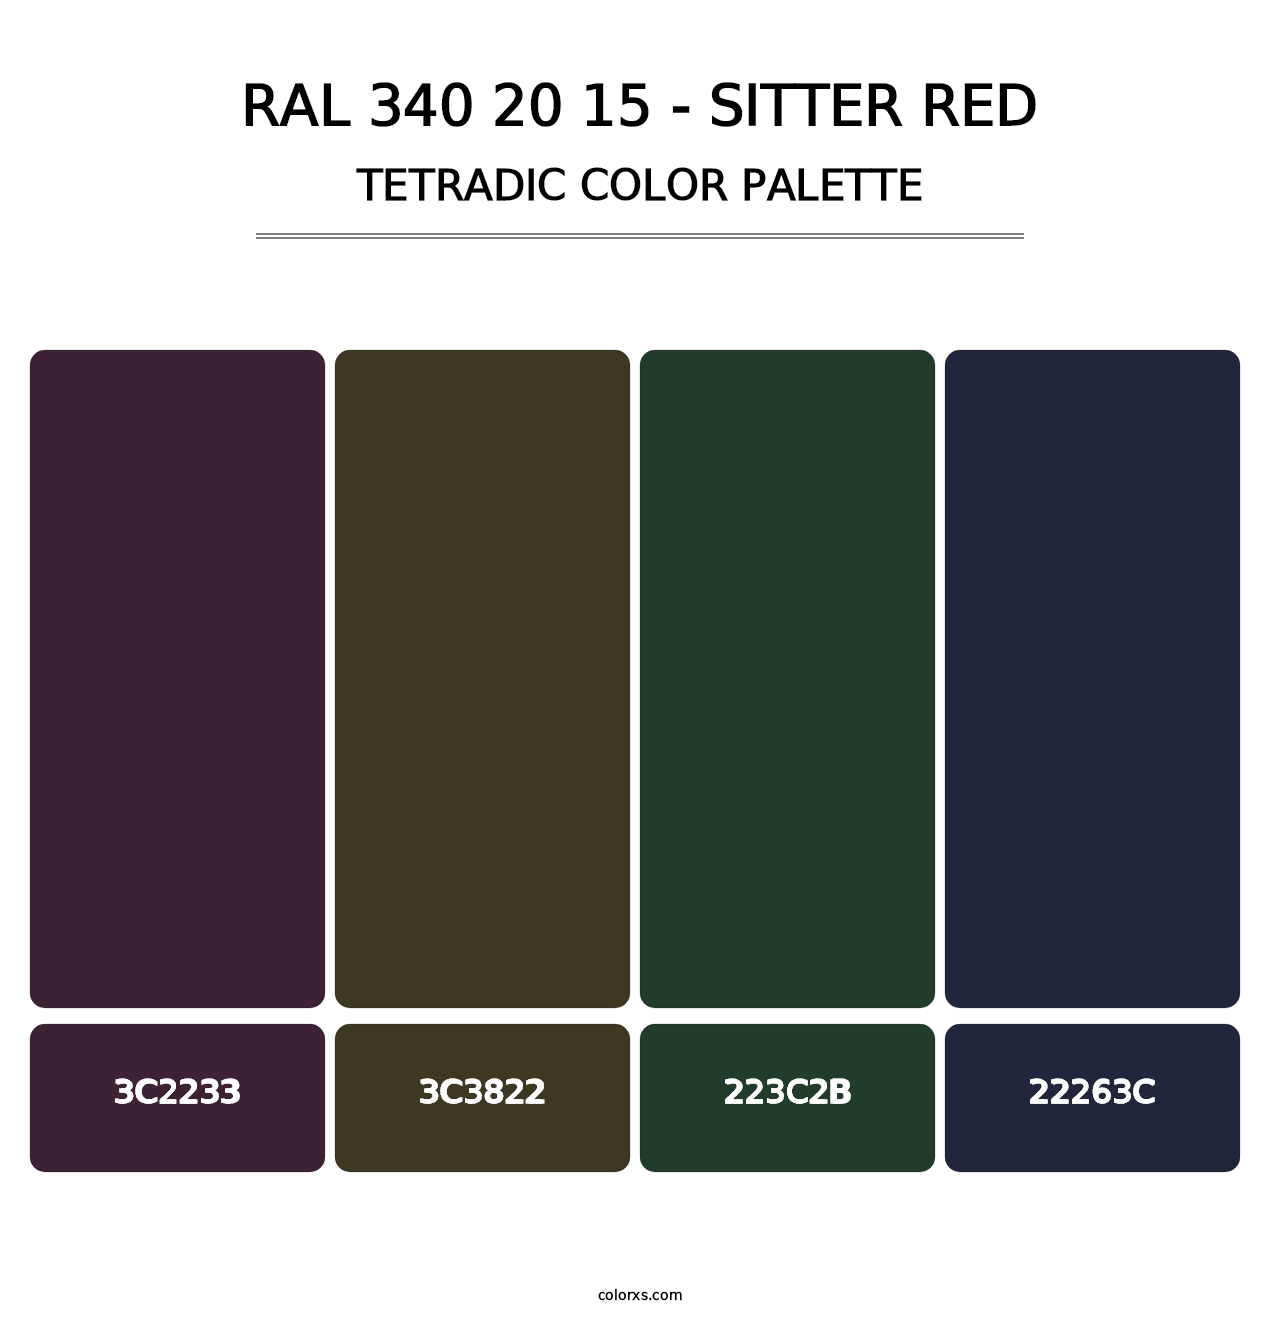 RAL 340 20 15 - Sitter Red - Tetradic Color Palette